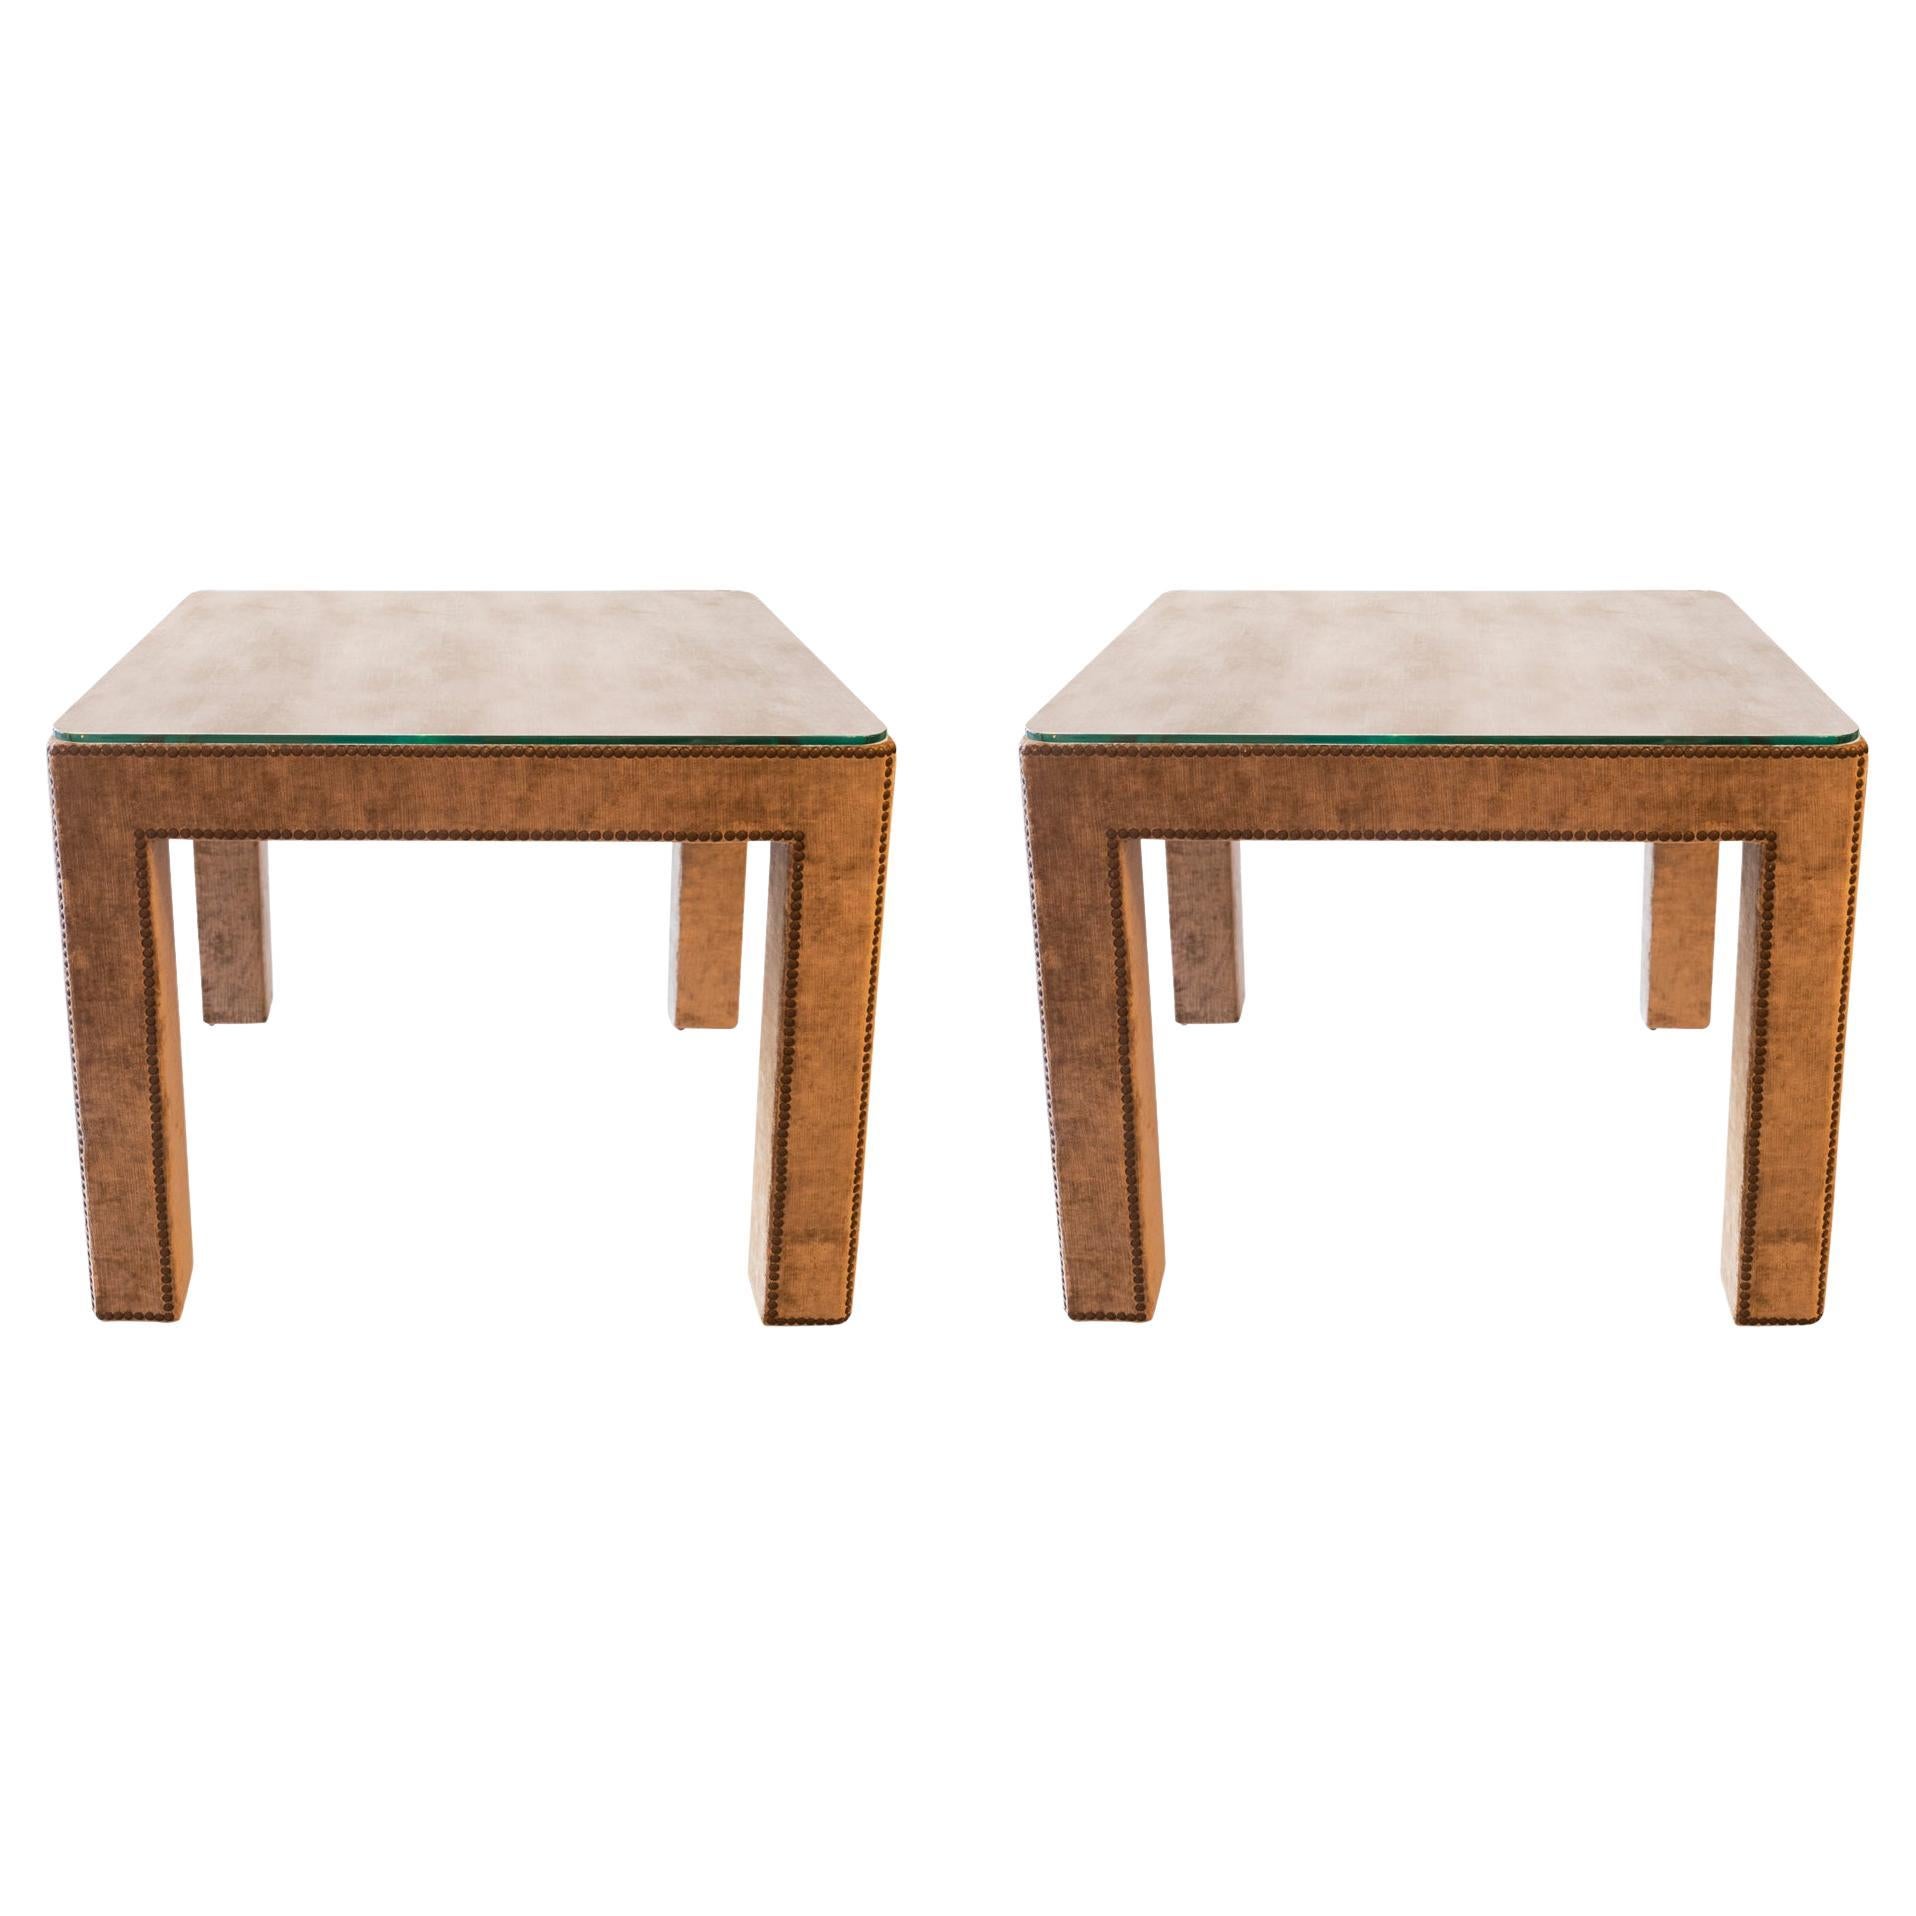 Pair of side tables, France, circa 1970